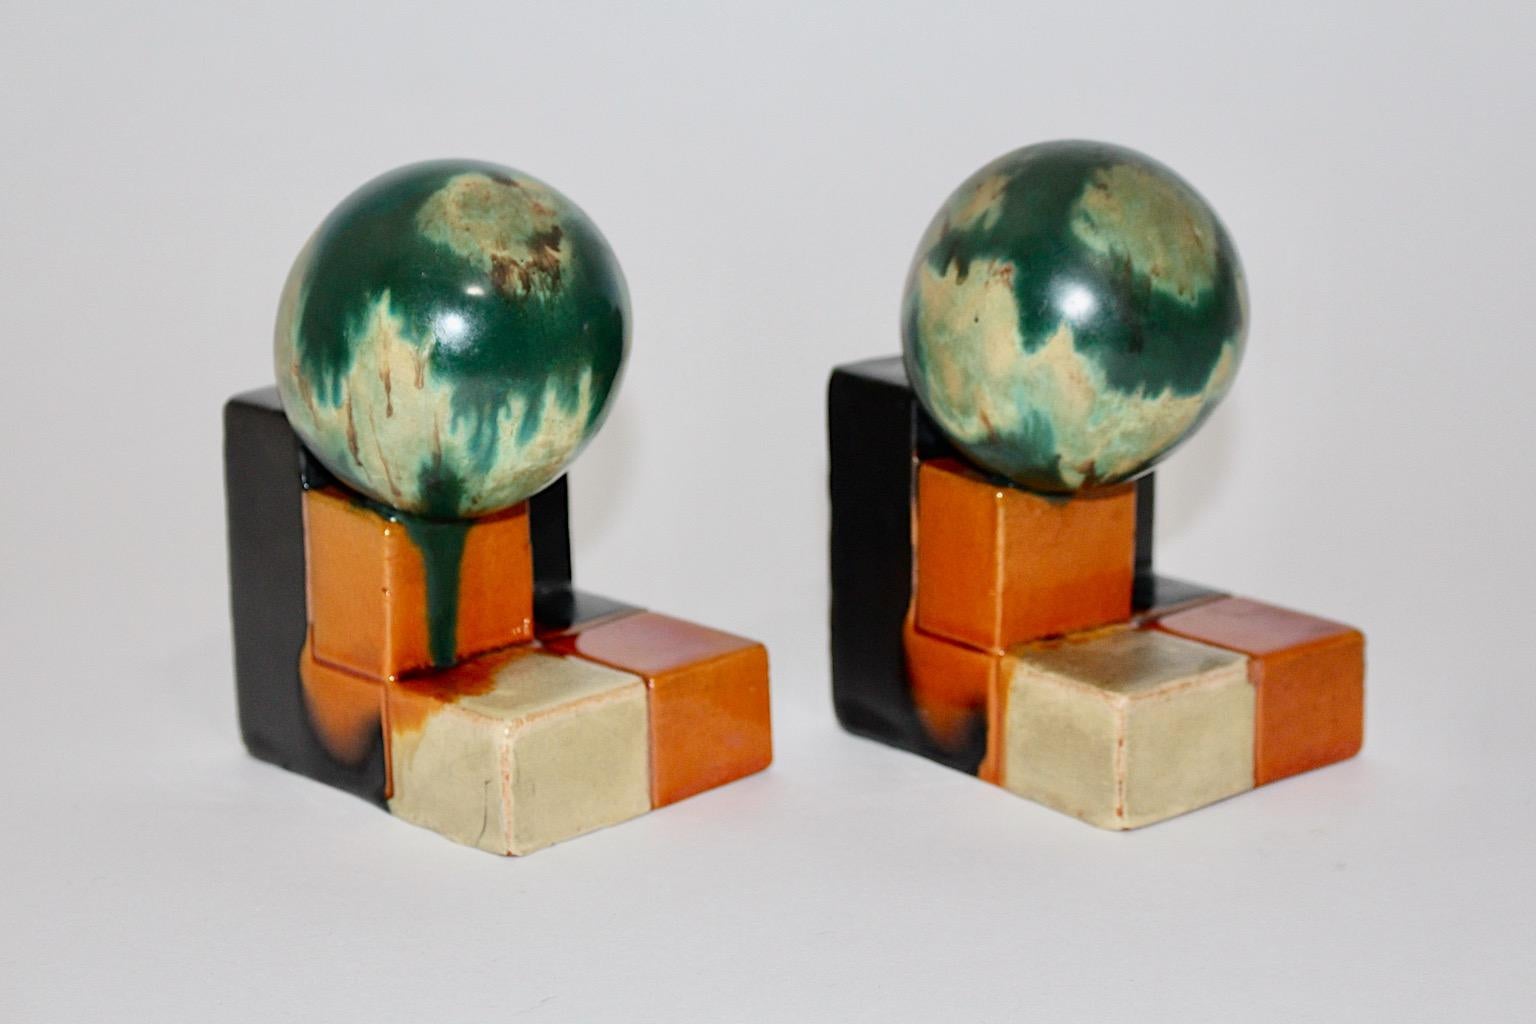 Ceramic Art Deco Attributed Vintage Bookends Green Orange, 1920, Germany For Sale 2